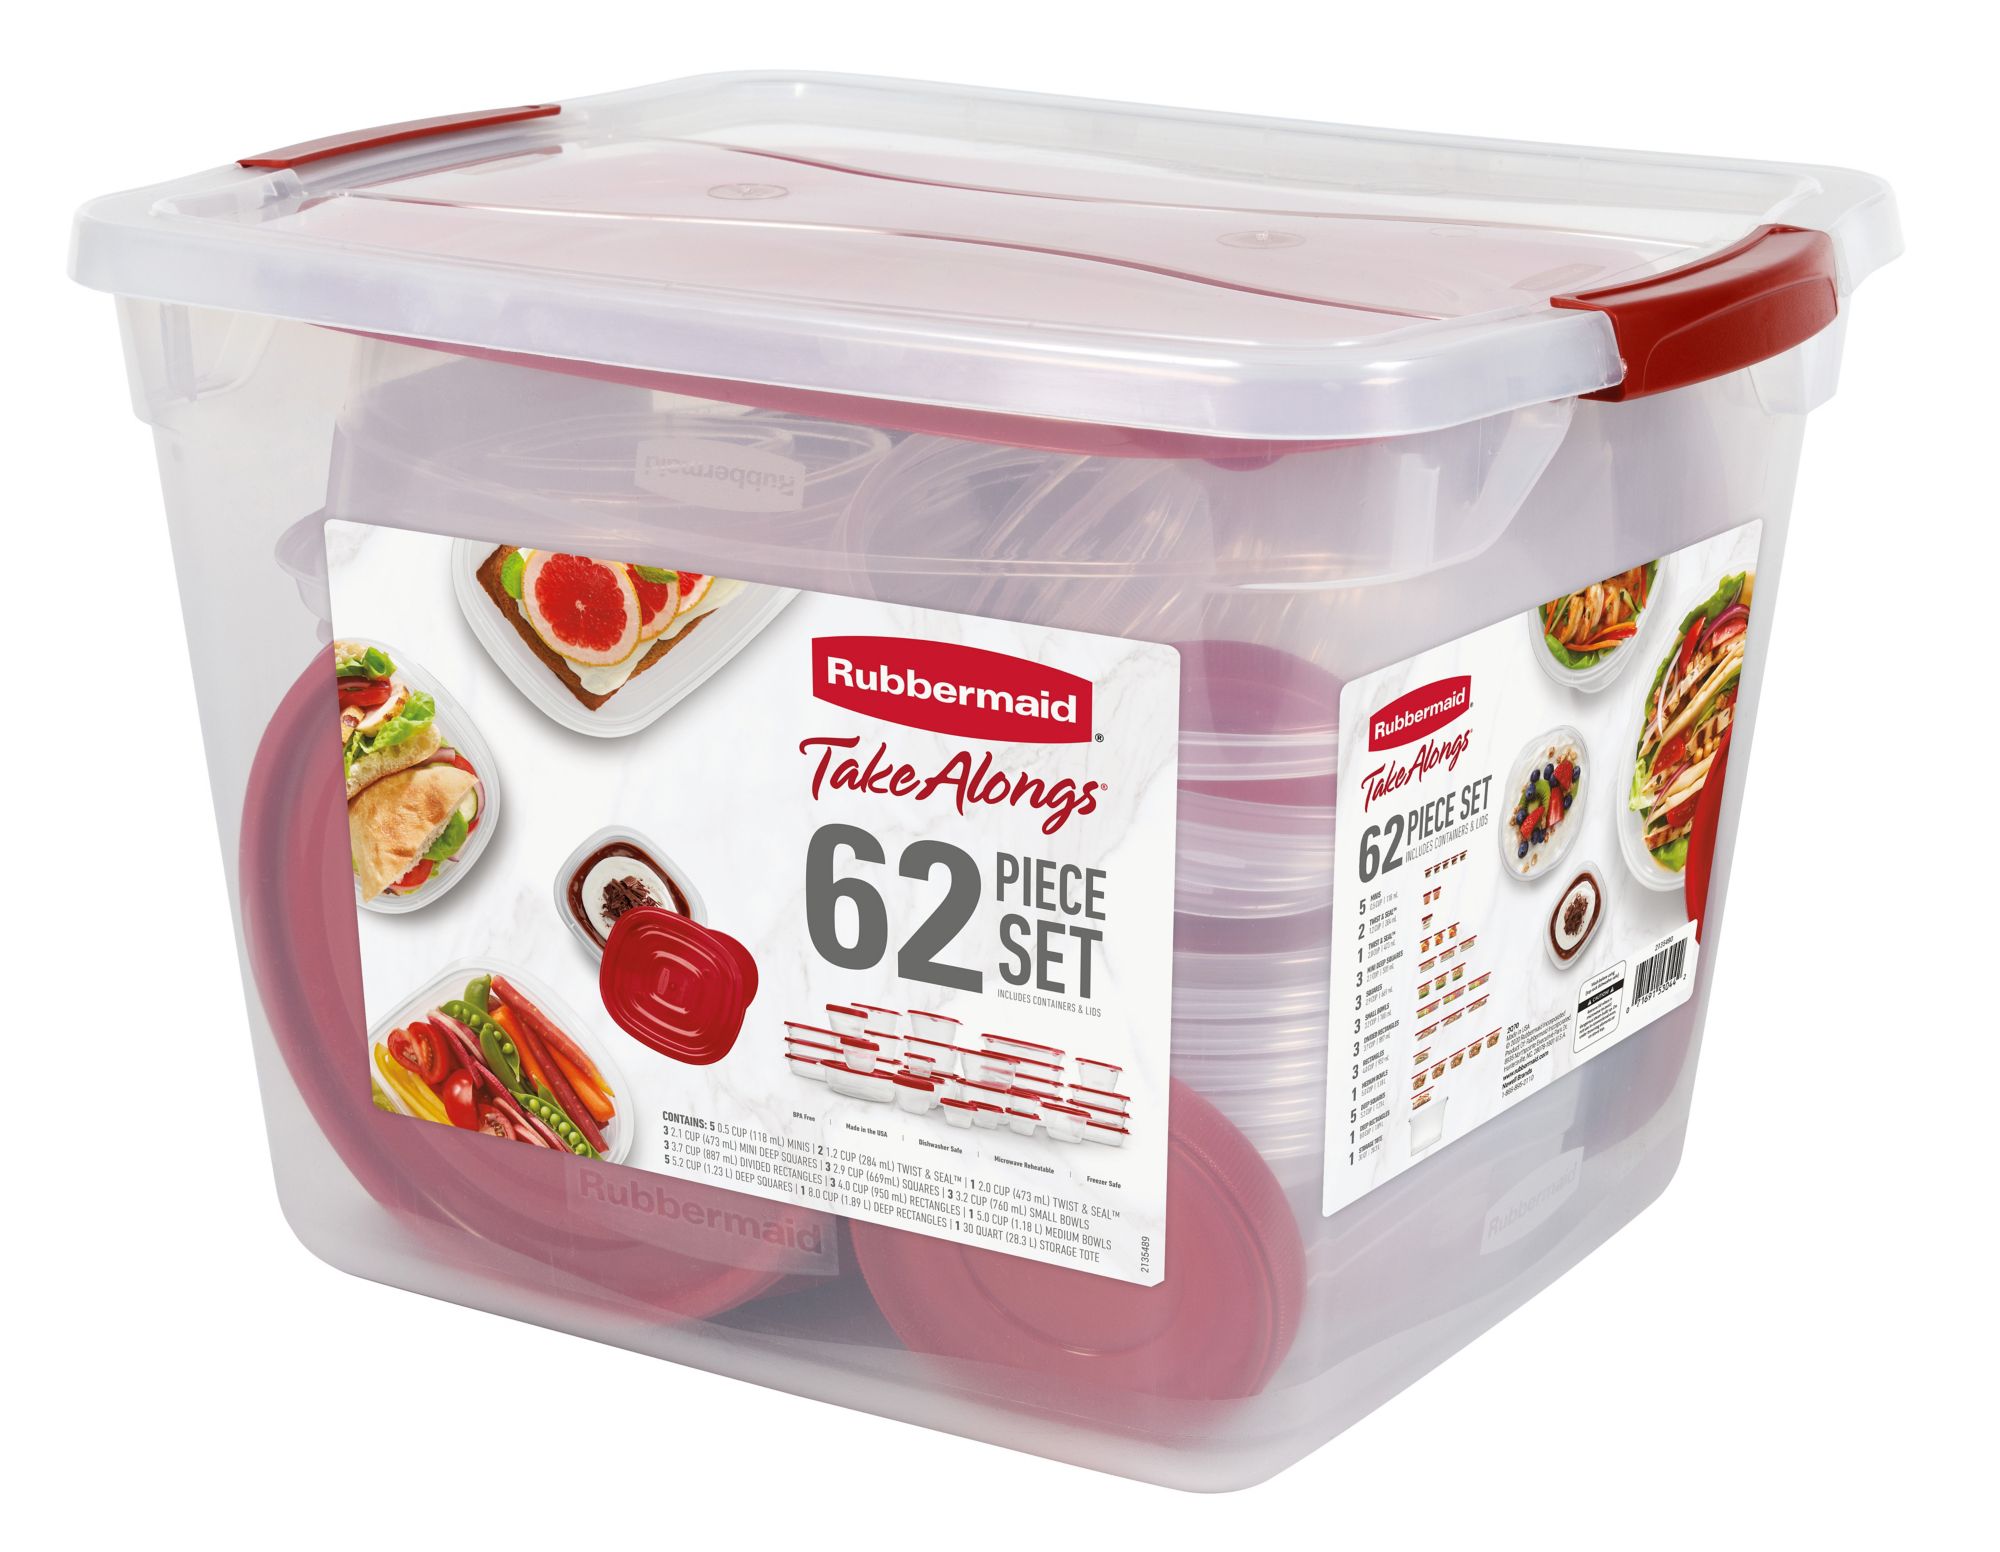 Glad Family Size Food Storage Containers, 3-Pack